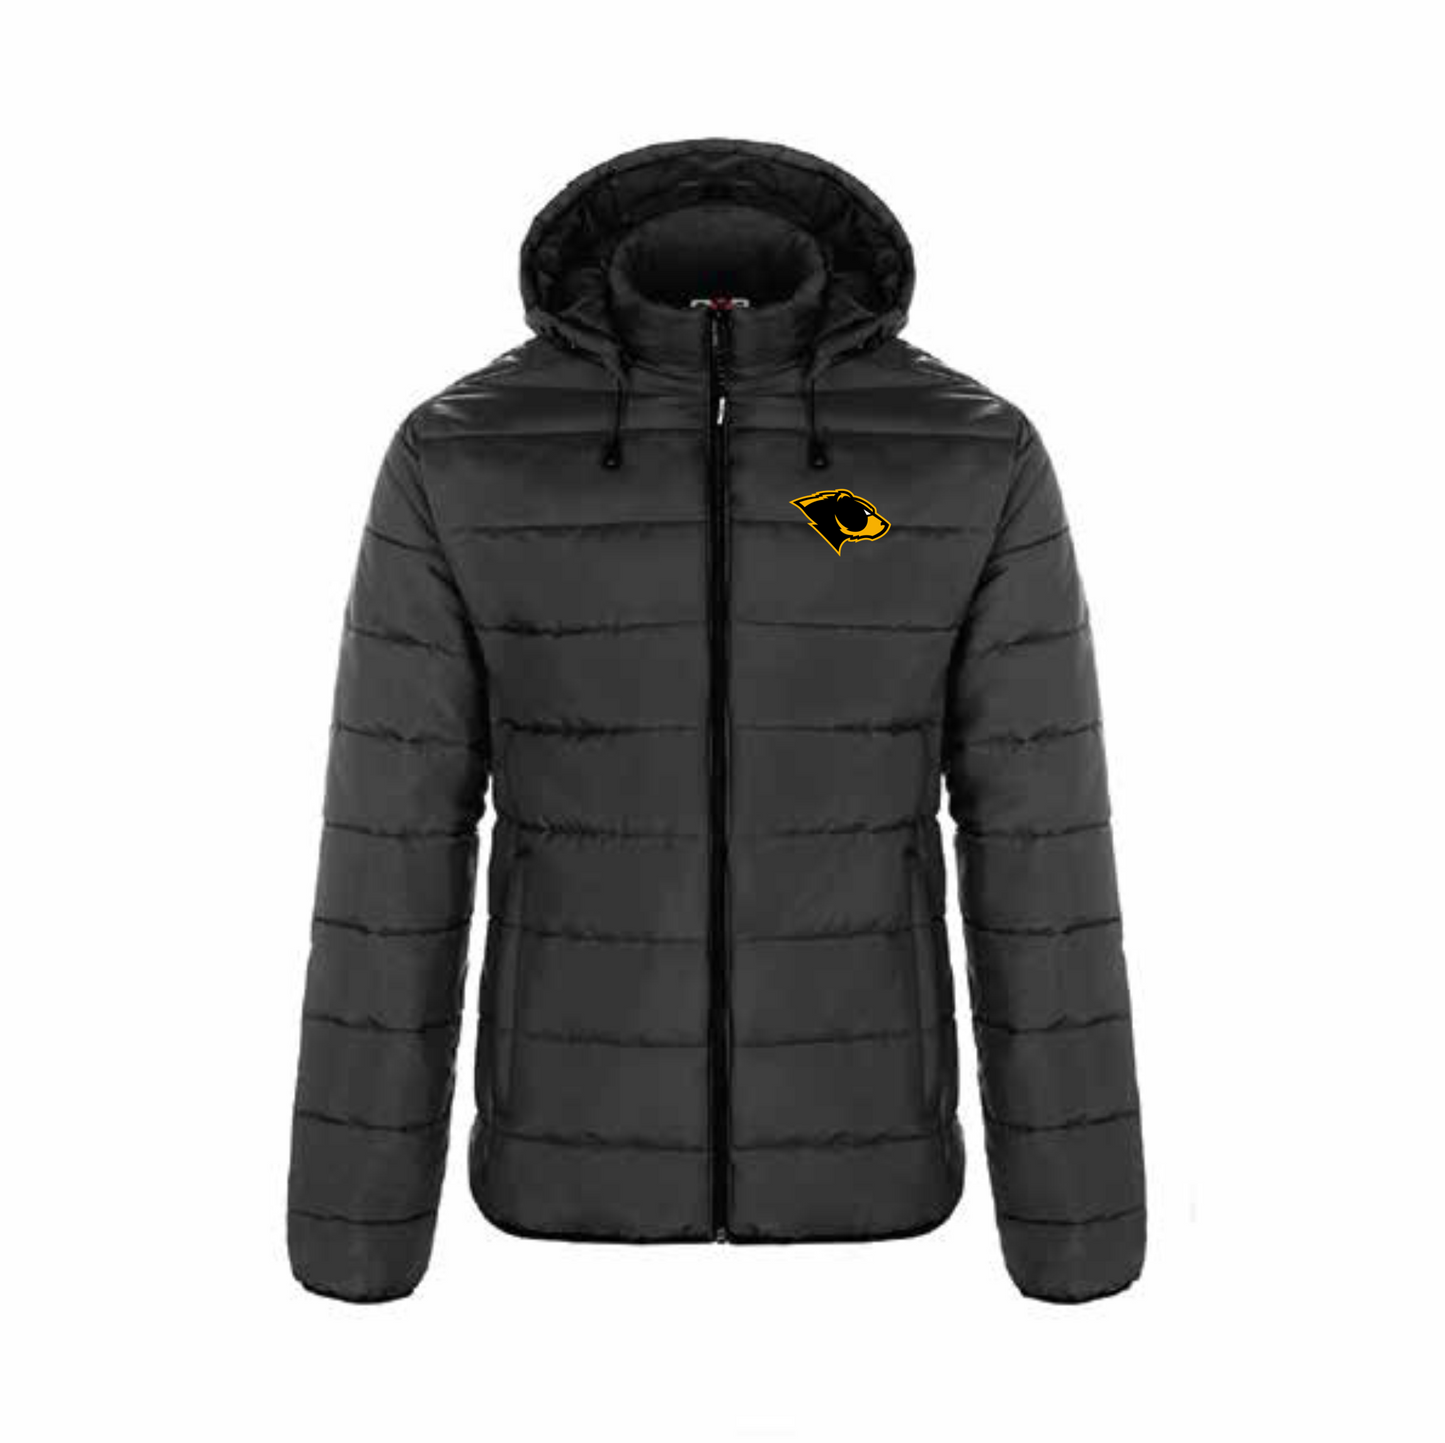 ORDER BY OCT 6th, Ships week of NOV 7th - Oakland Bears Glacial Midweight Puffer Jacket - Women's